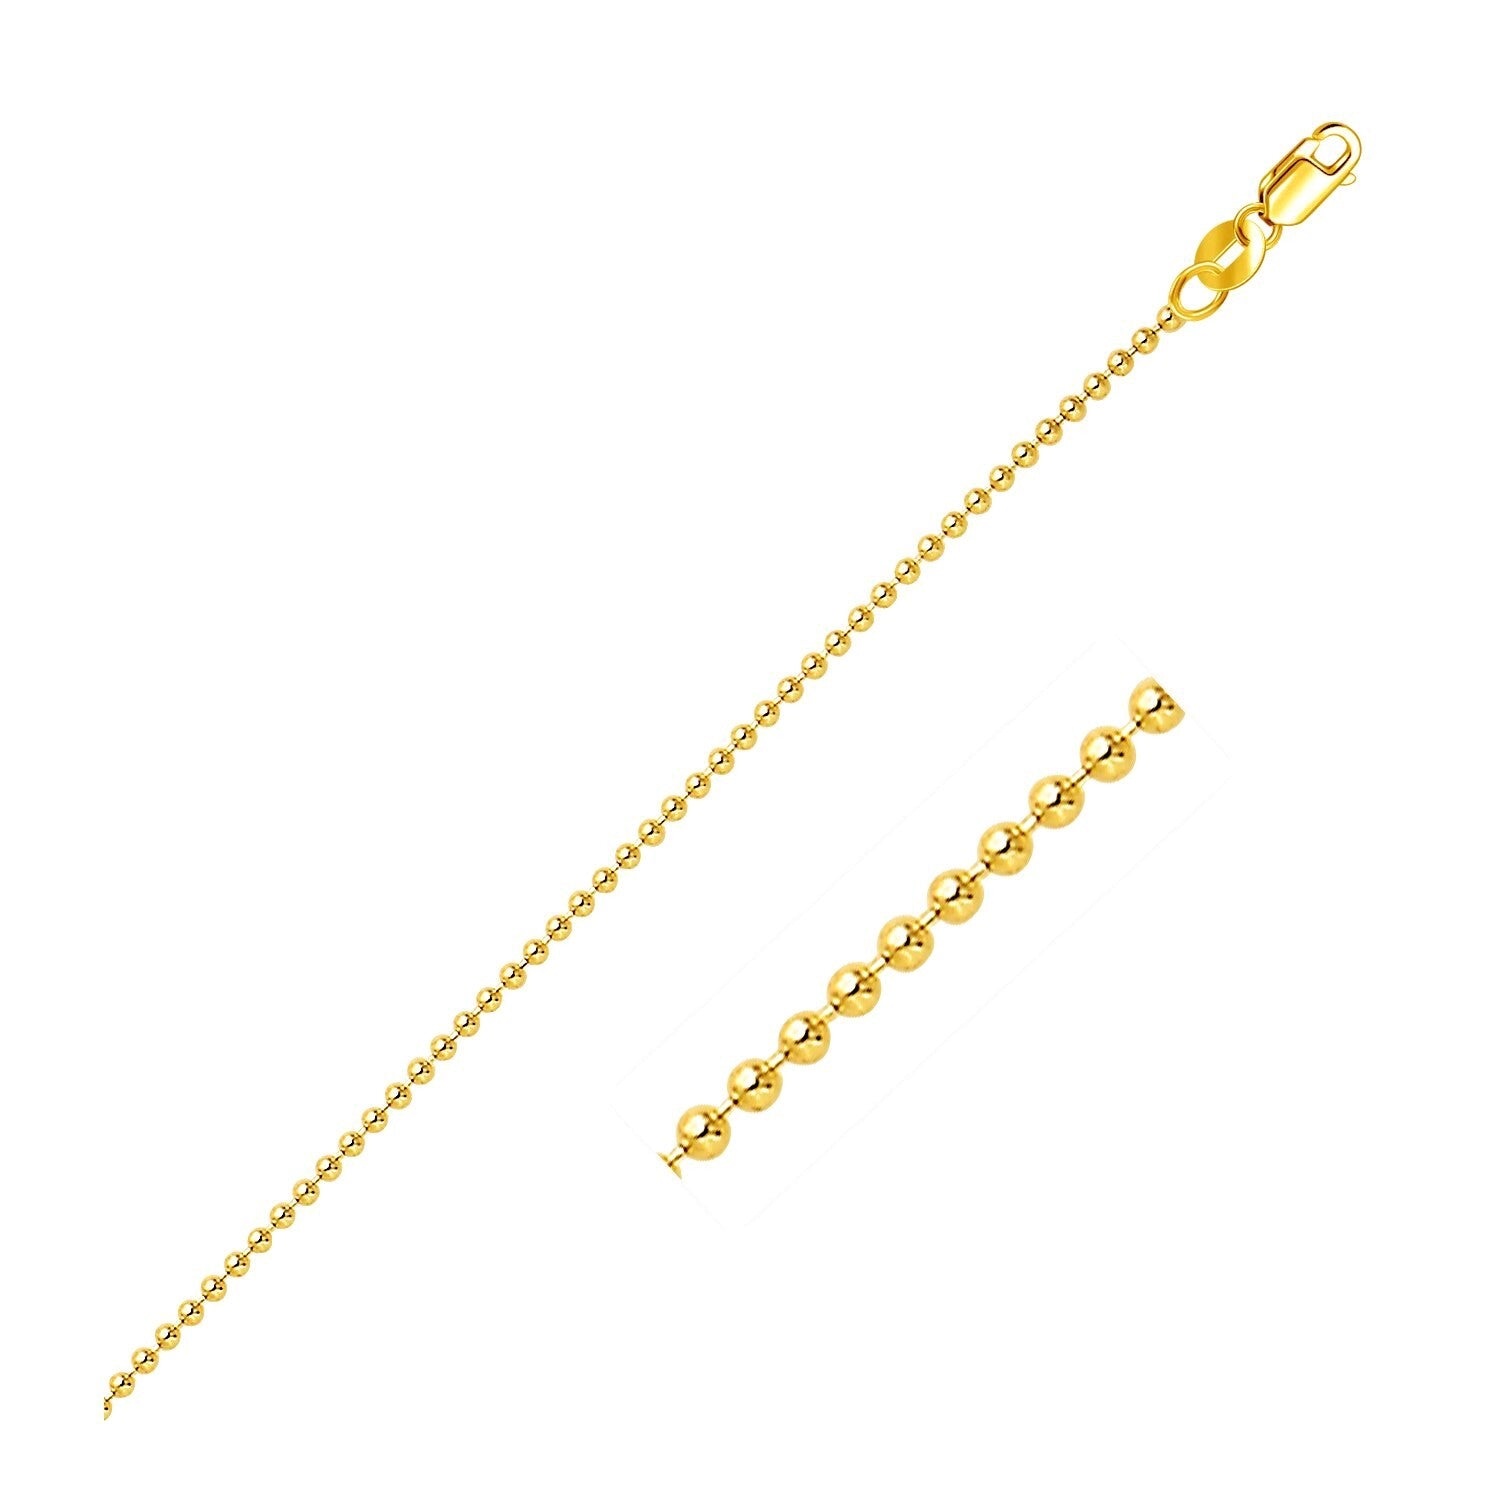 This non diamond cut bead chain comes in 14k yellow gold and has a width of 1.5 mm A classic choice made with special attention to detail, this 14k yellow gold bead chain offers exquisite, timeless style, you'll experience shine, luster, and quality for years to come.